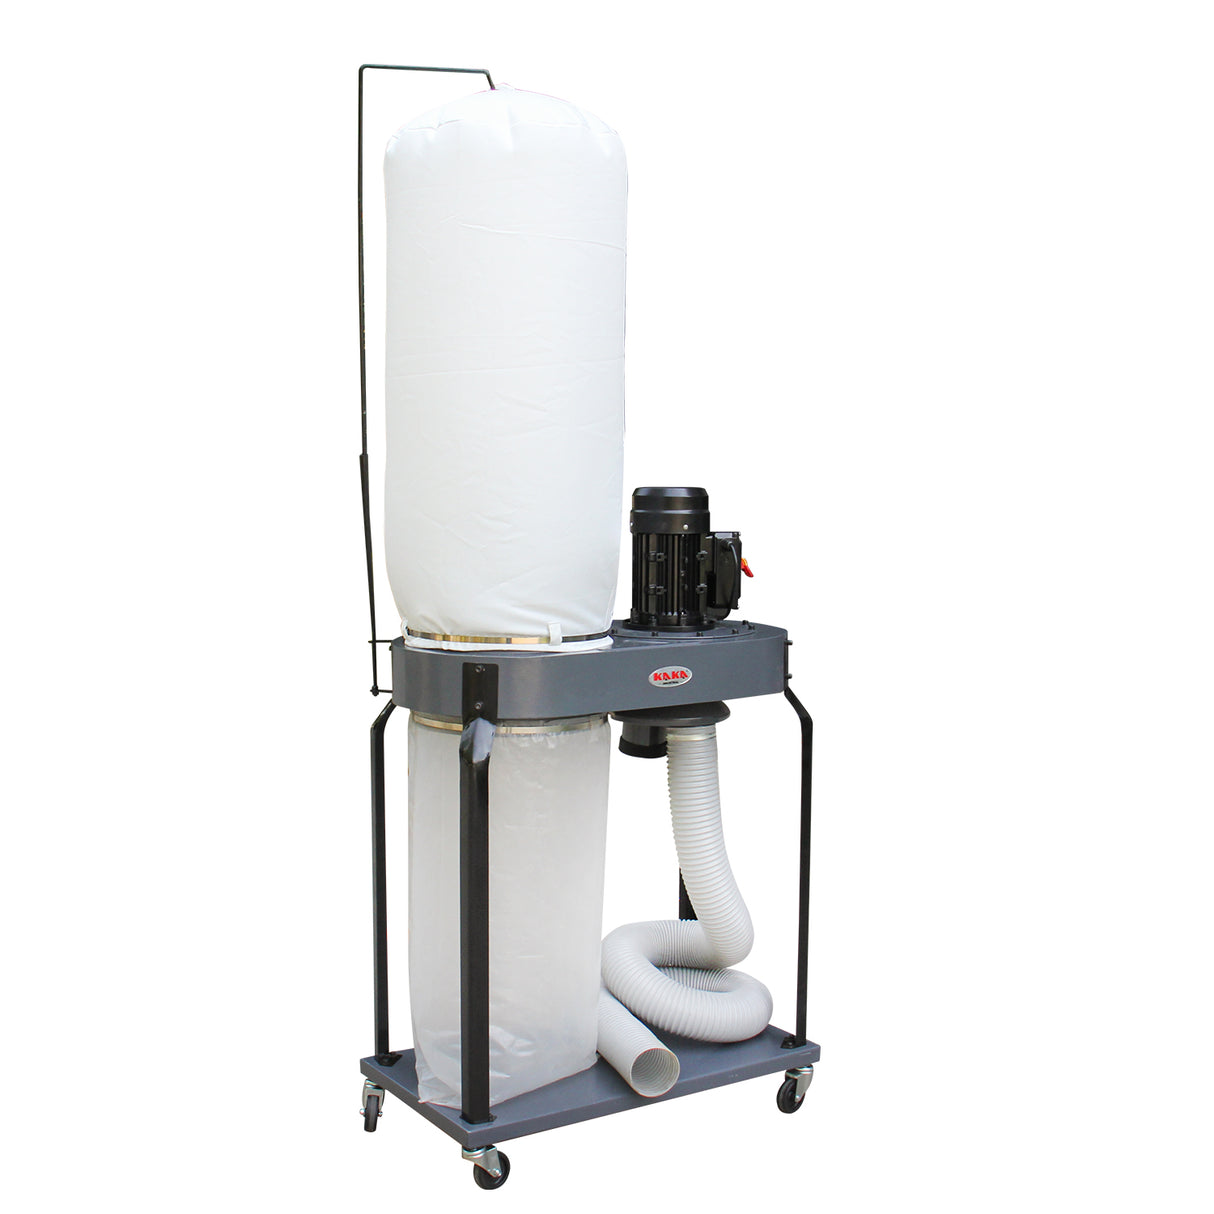 Kang Industrial DC900 Bag Style Dust Collector, Cyclone Dust Collector for Wood Workshop 240V Motor